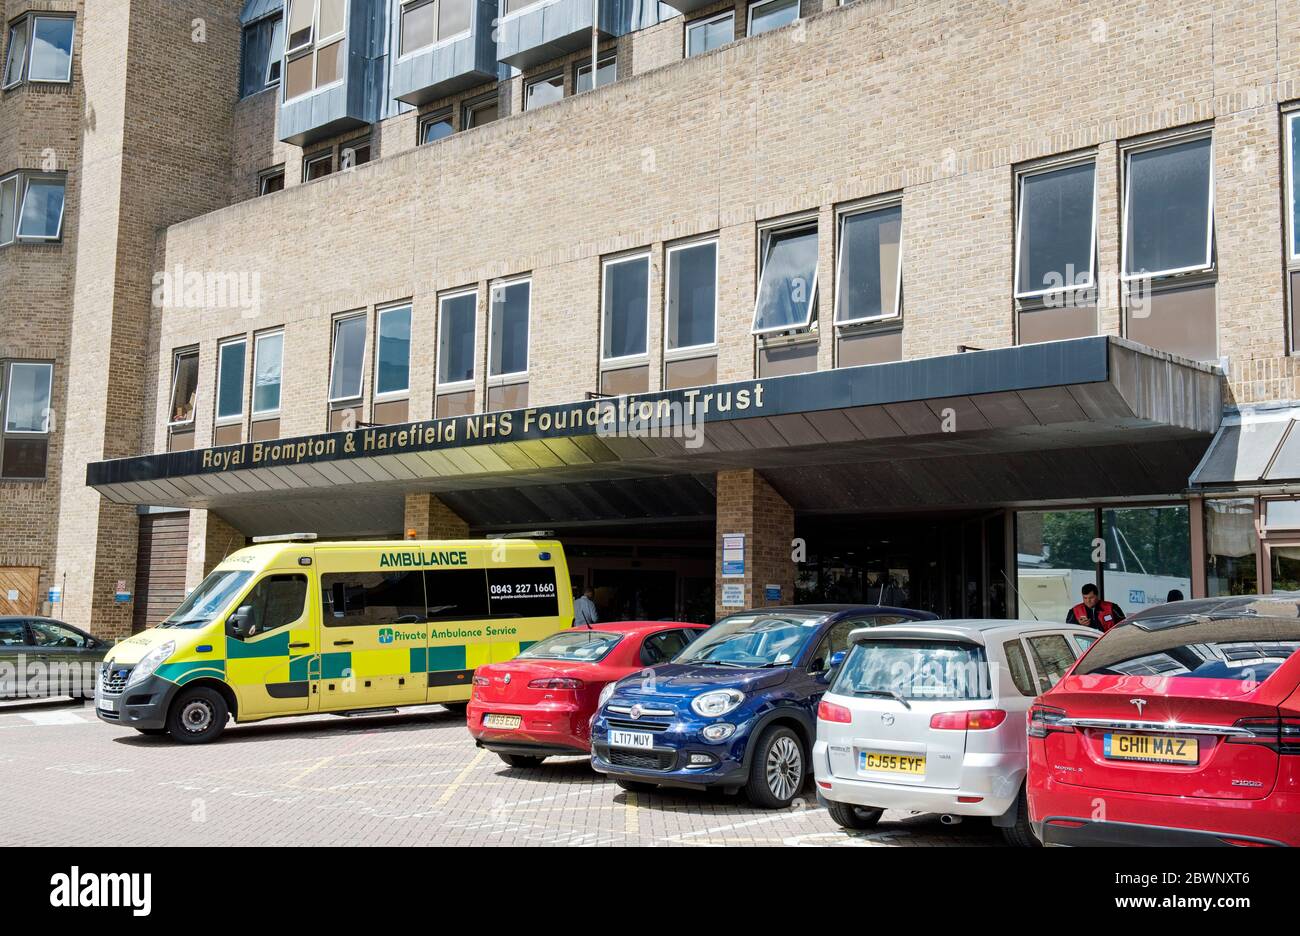 Royal Brompton Hospital & Harefield NHS Foundation Trust, Chelsea Wing with cars and ambulance parked outside, London Borough of Kensington & Chelsea Stock Photo